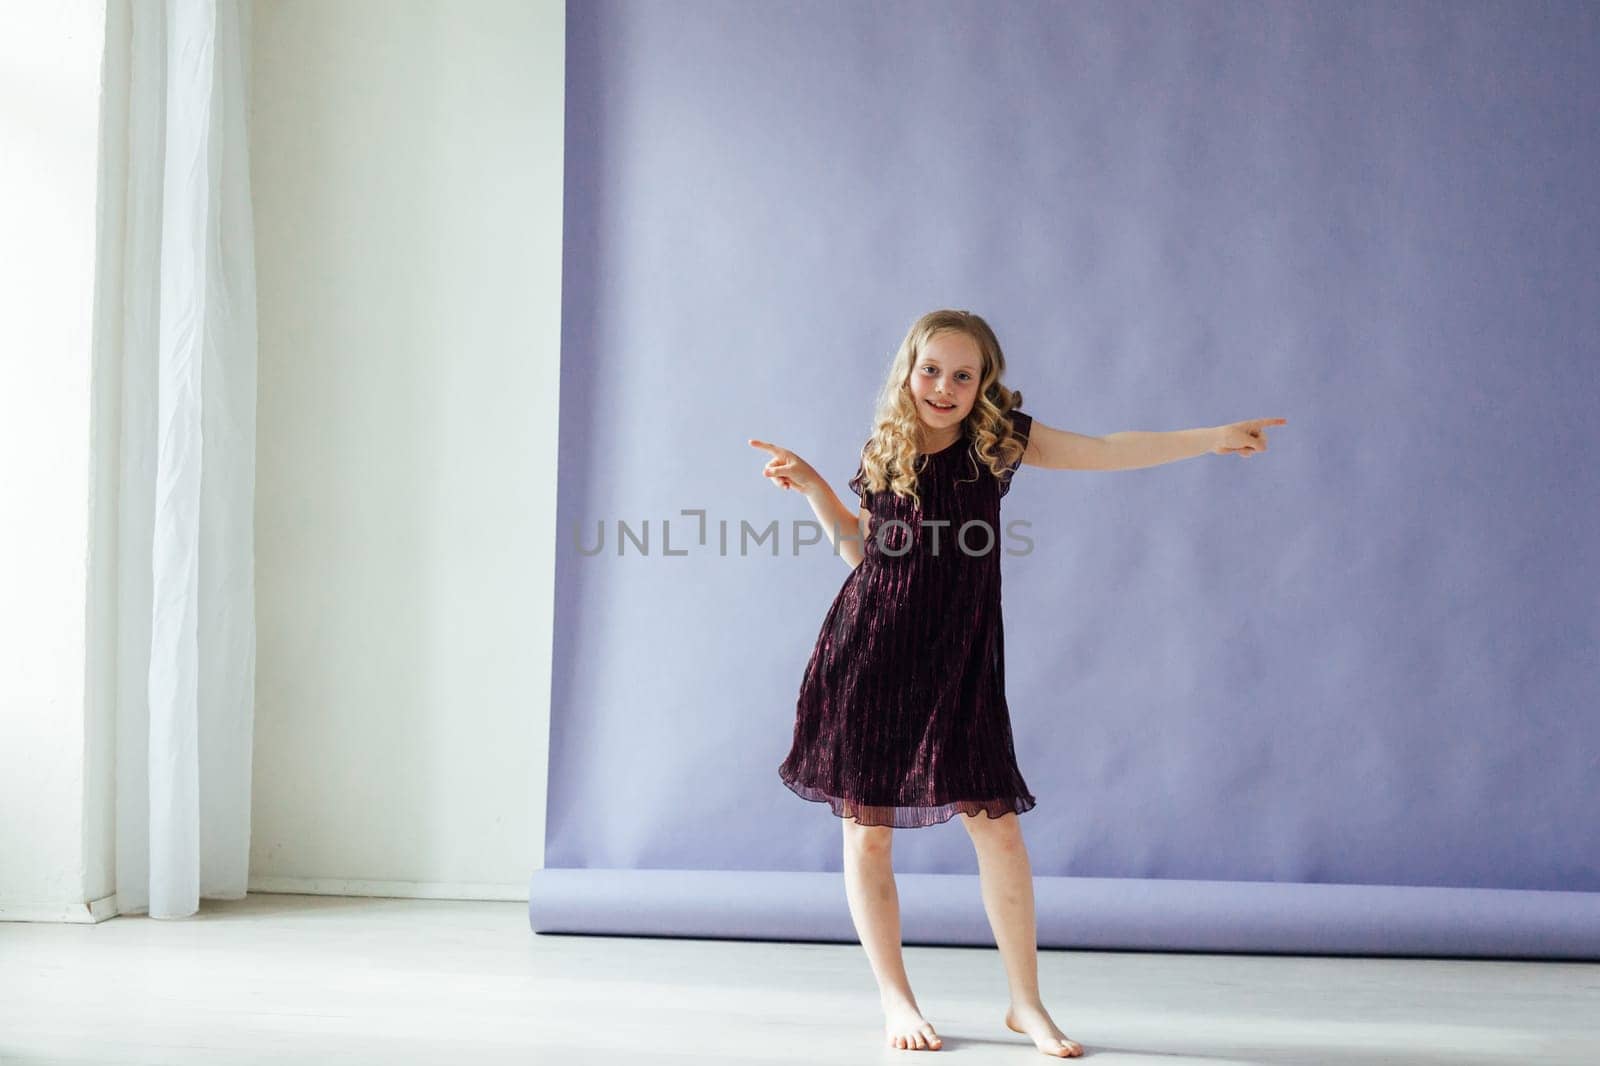 Girl in a dress dances to the music alone in the room by Simakov